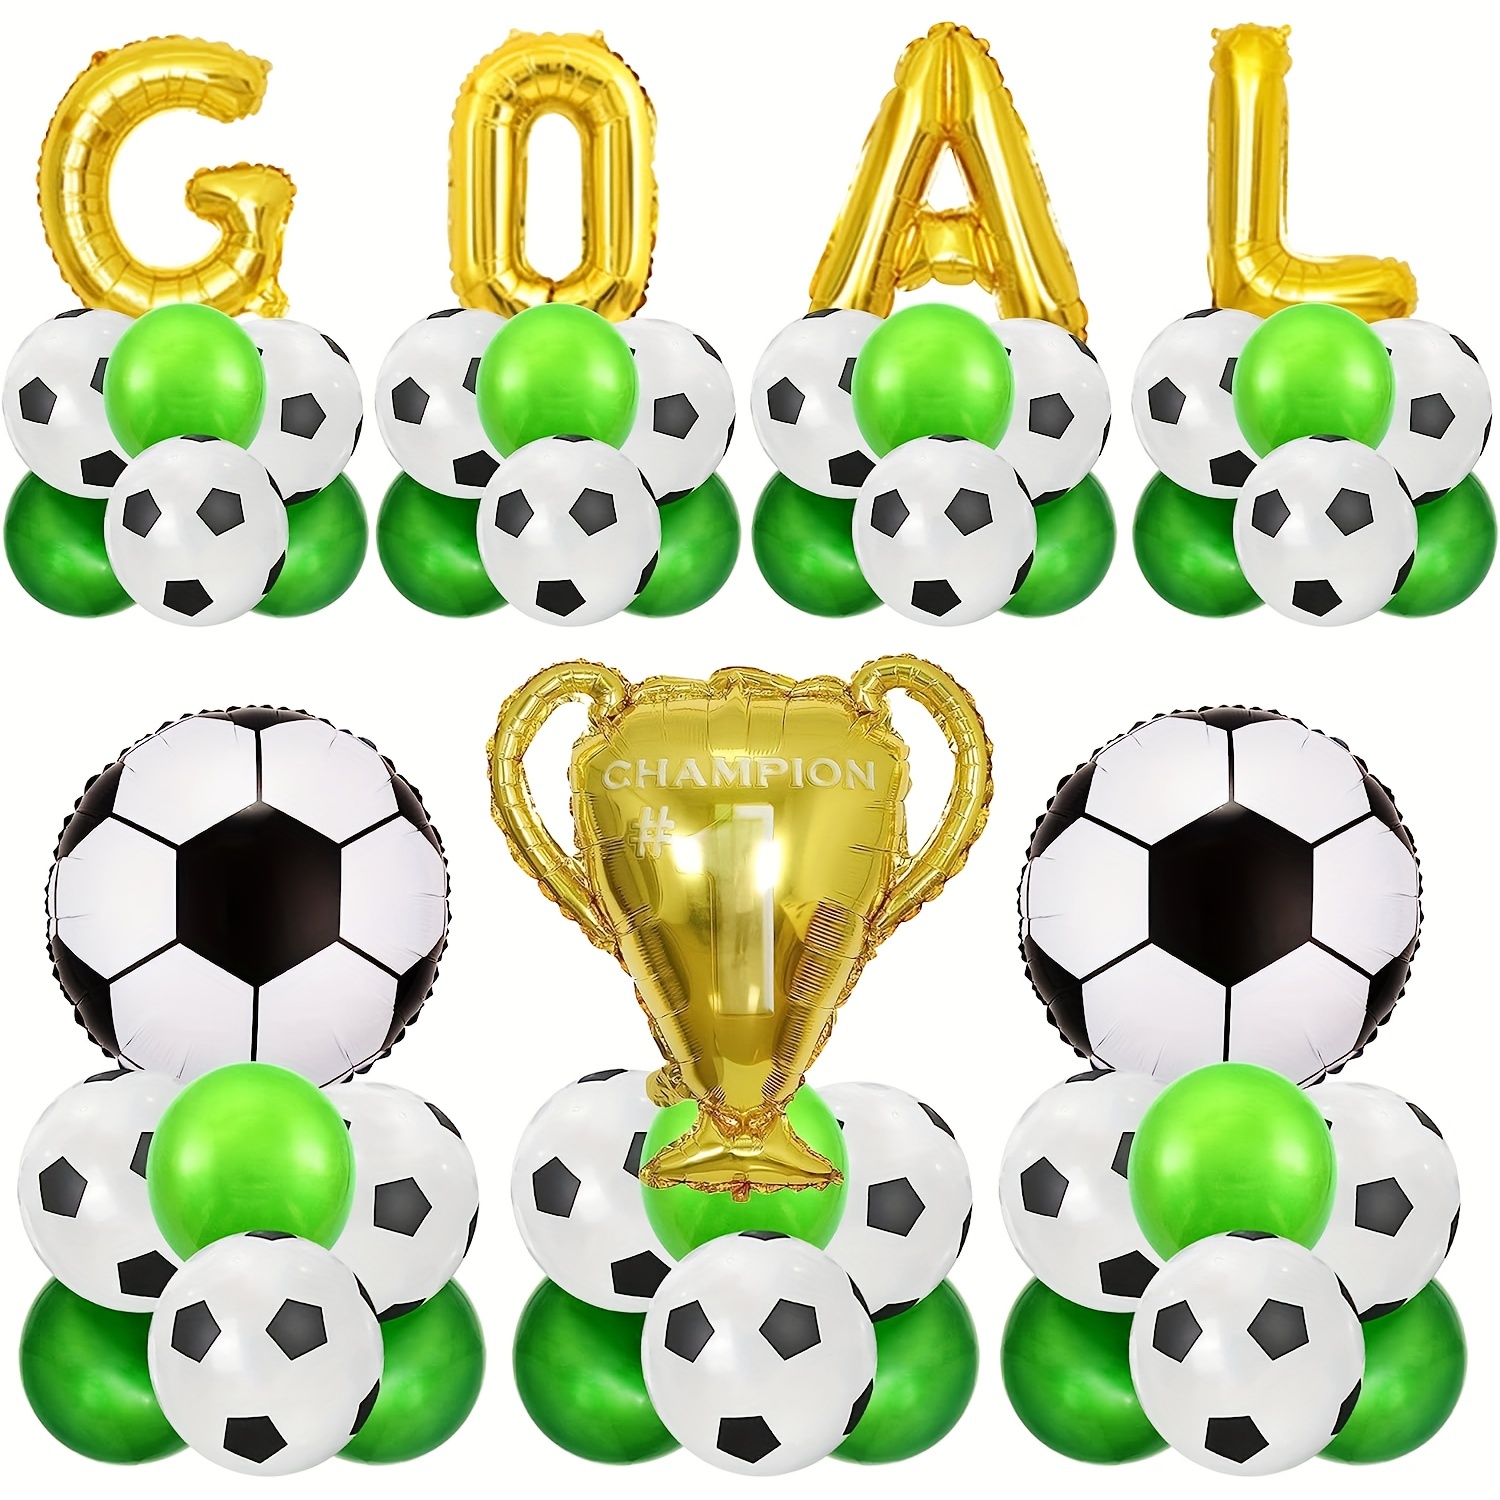 

Set, Soccer Balloons Soccer Party Decorations Goal Trophy Balloons For Men's Boy's Soccer Birthday Party Sports Theme Party Football Theme Party Supplies